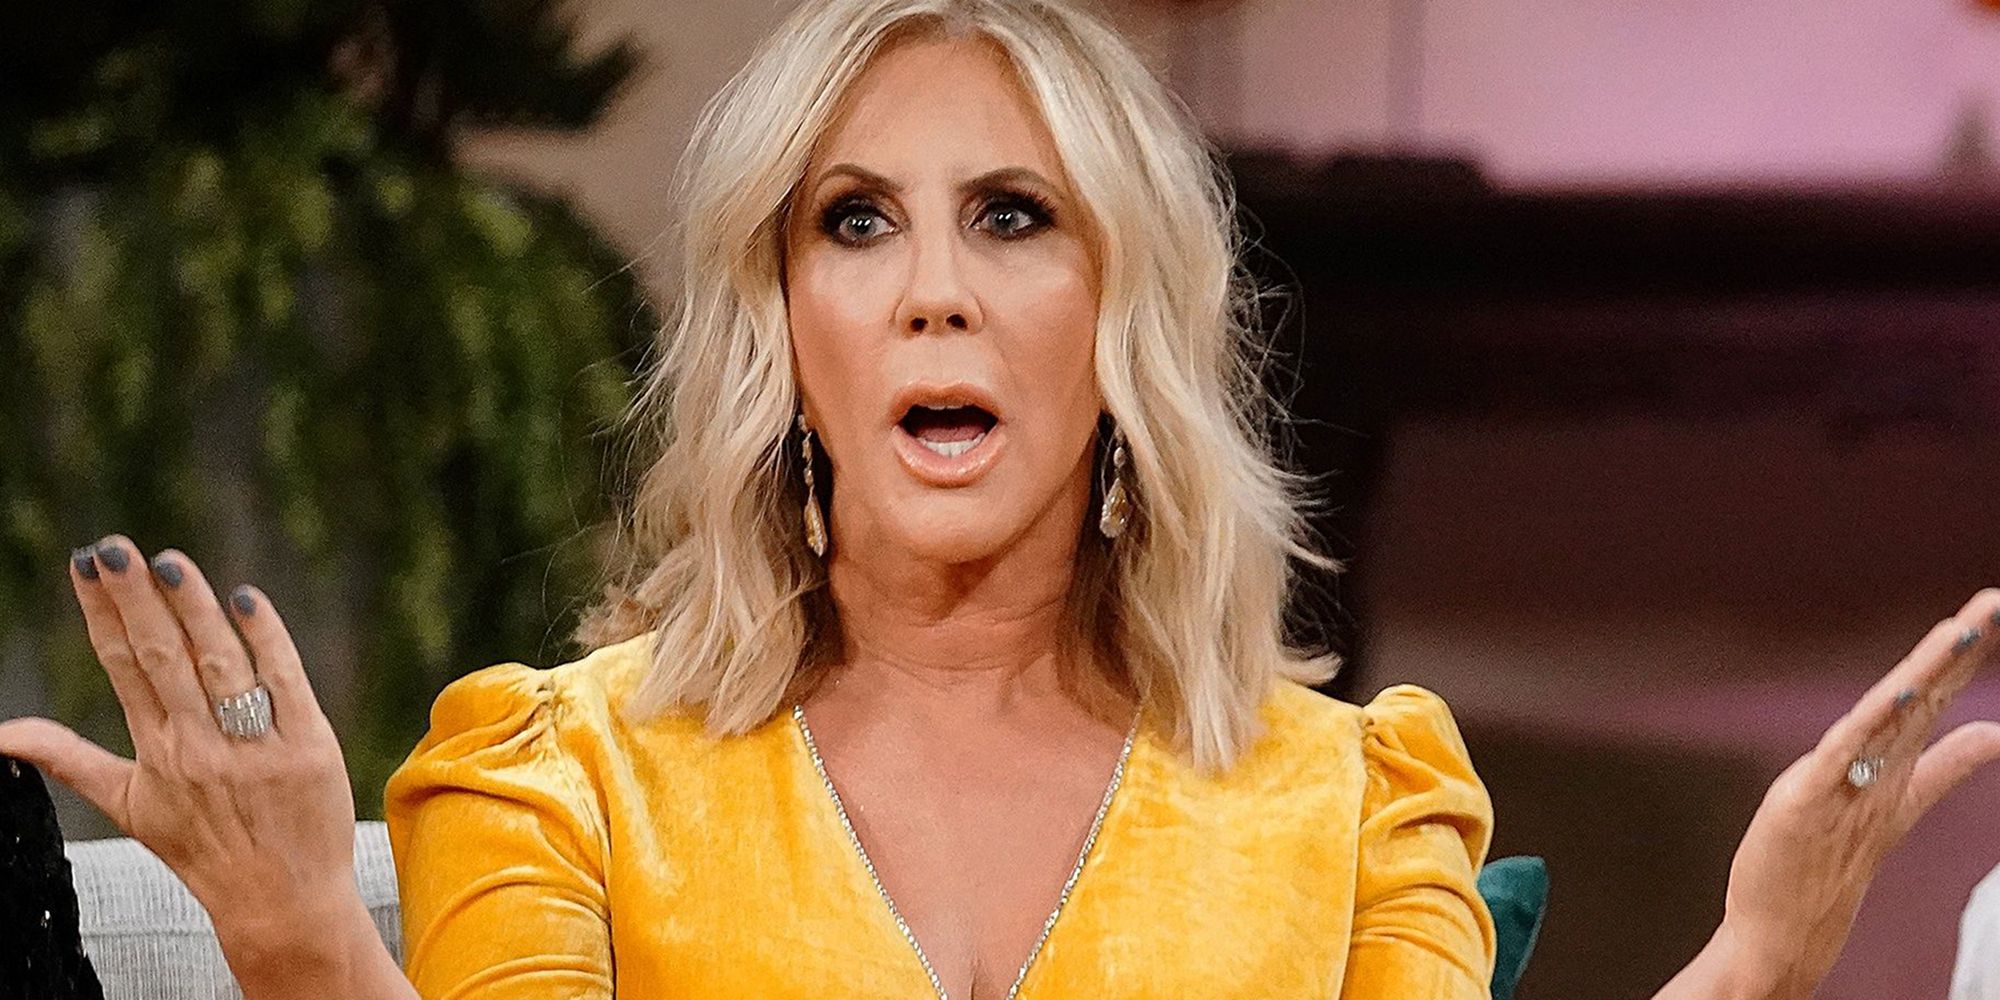 Vicki Gunvalson on The Real Housewives of Orange County